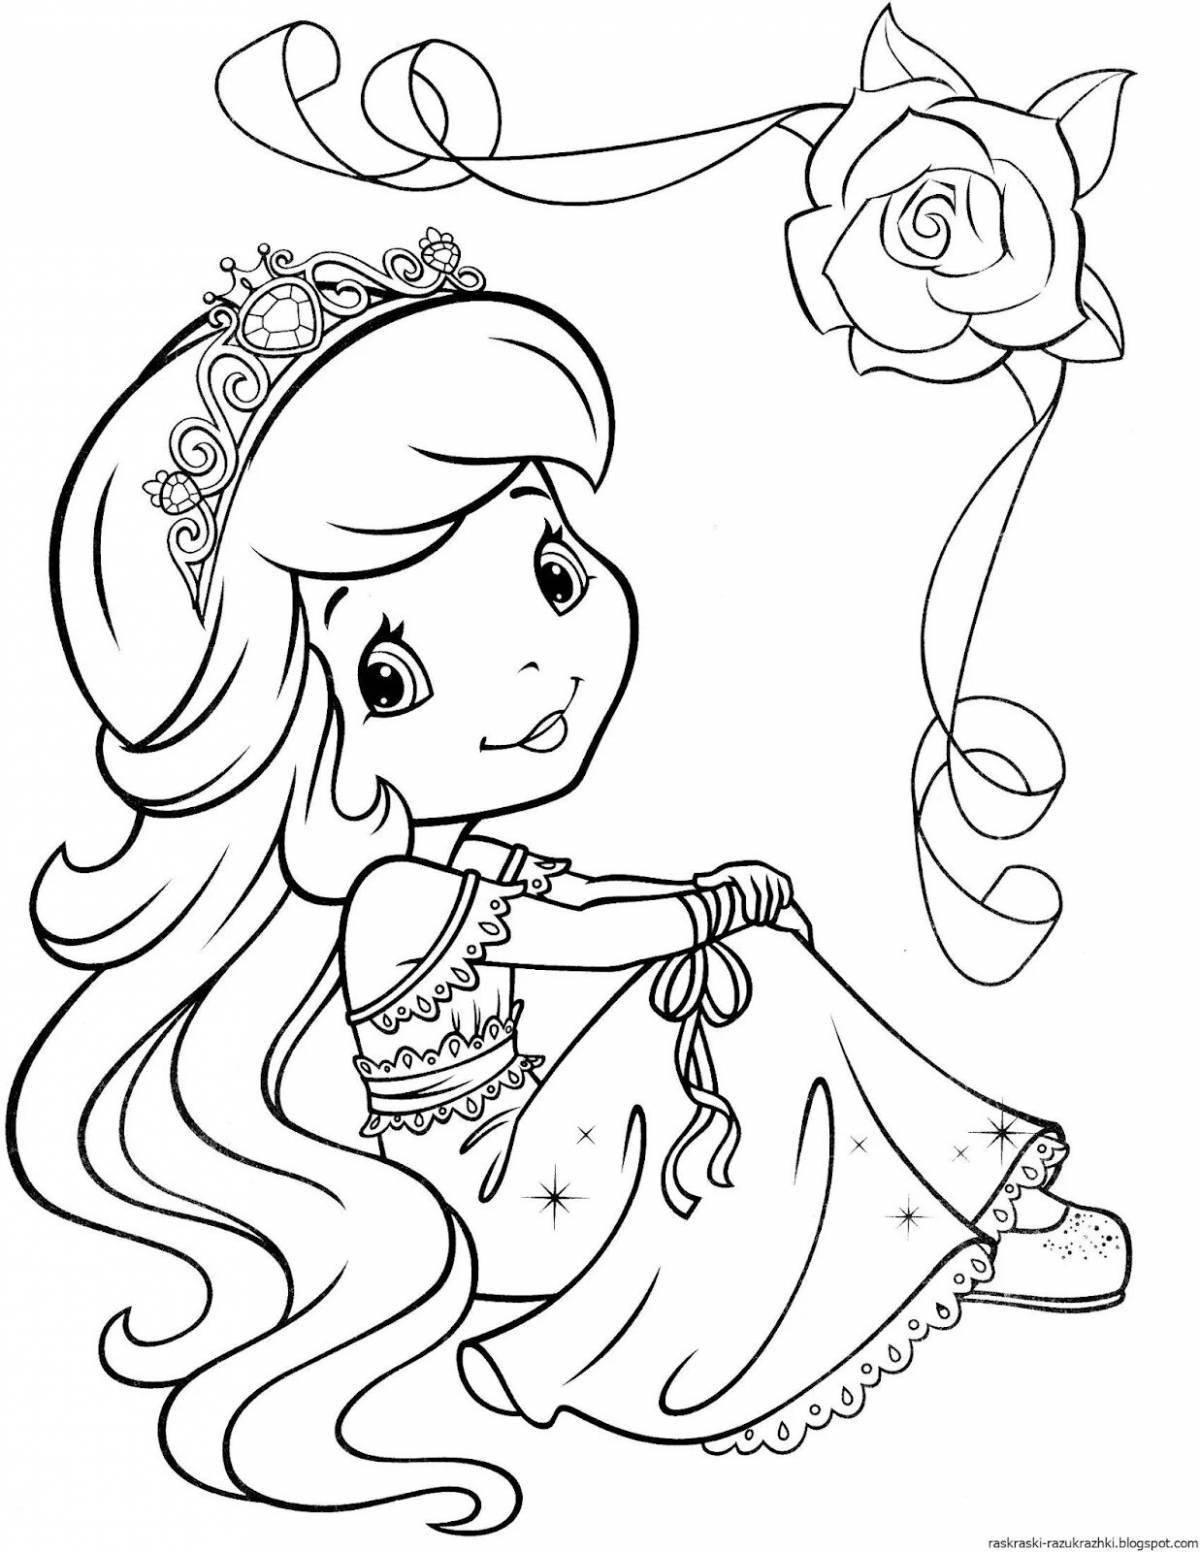 Color-brilliant coloring page for girls 5-7 years old